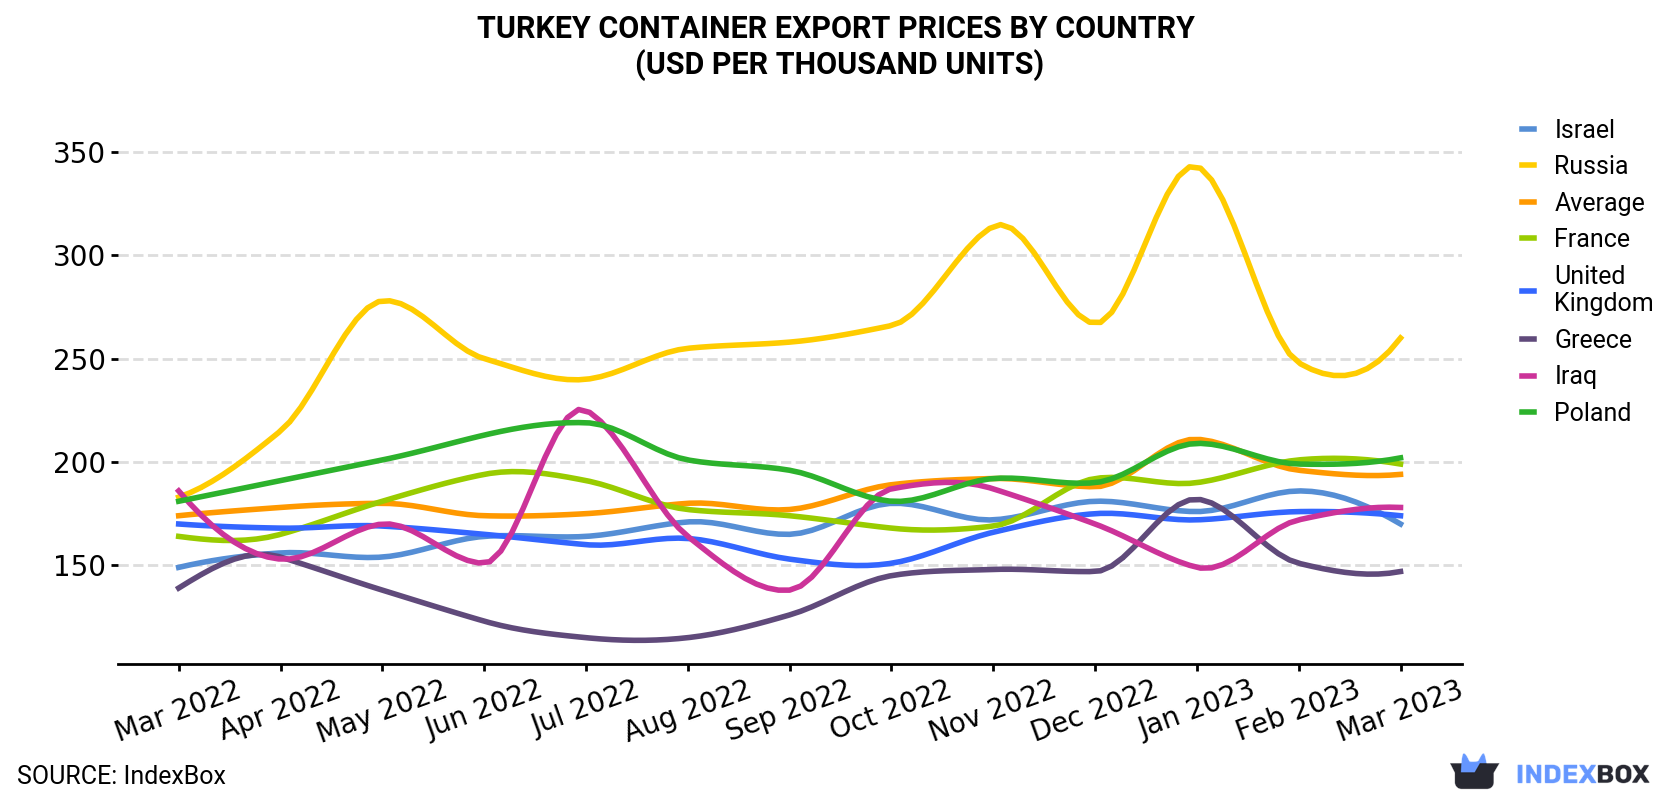 Turkey Container Export Prices By Country (USD Per Thousand Units)